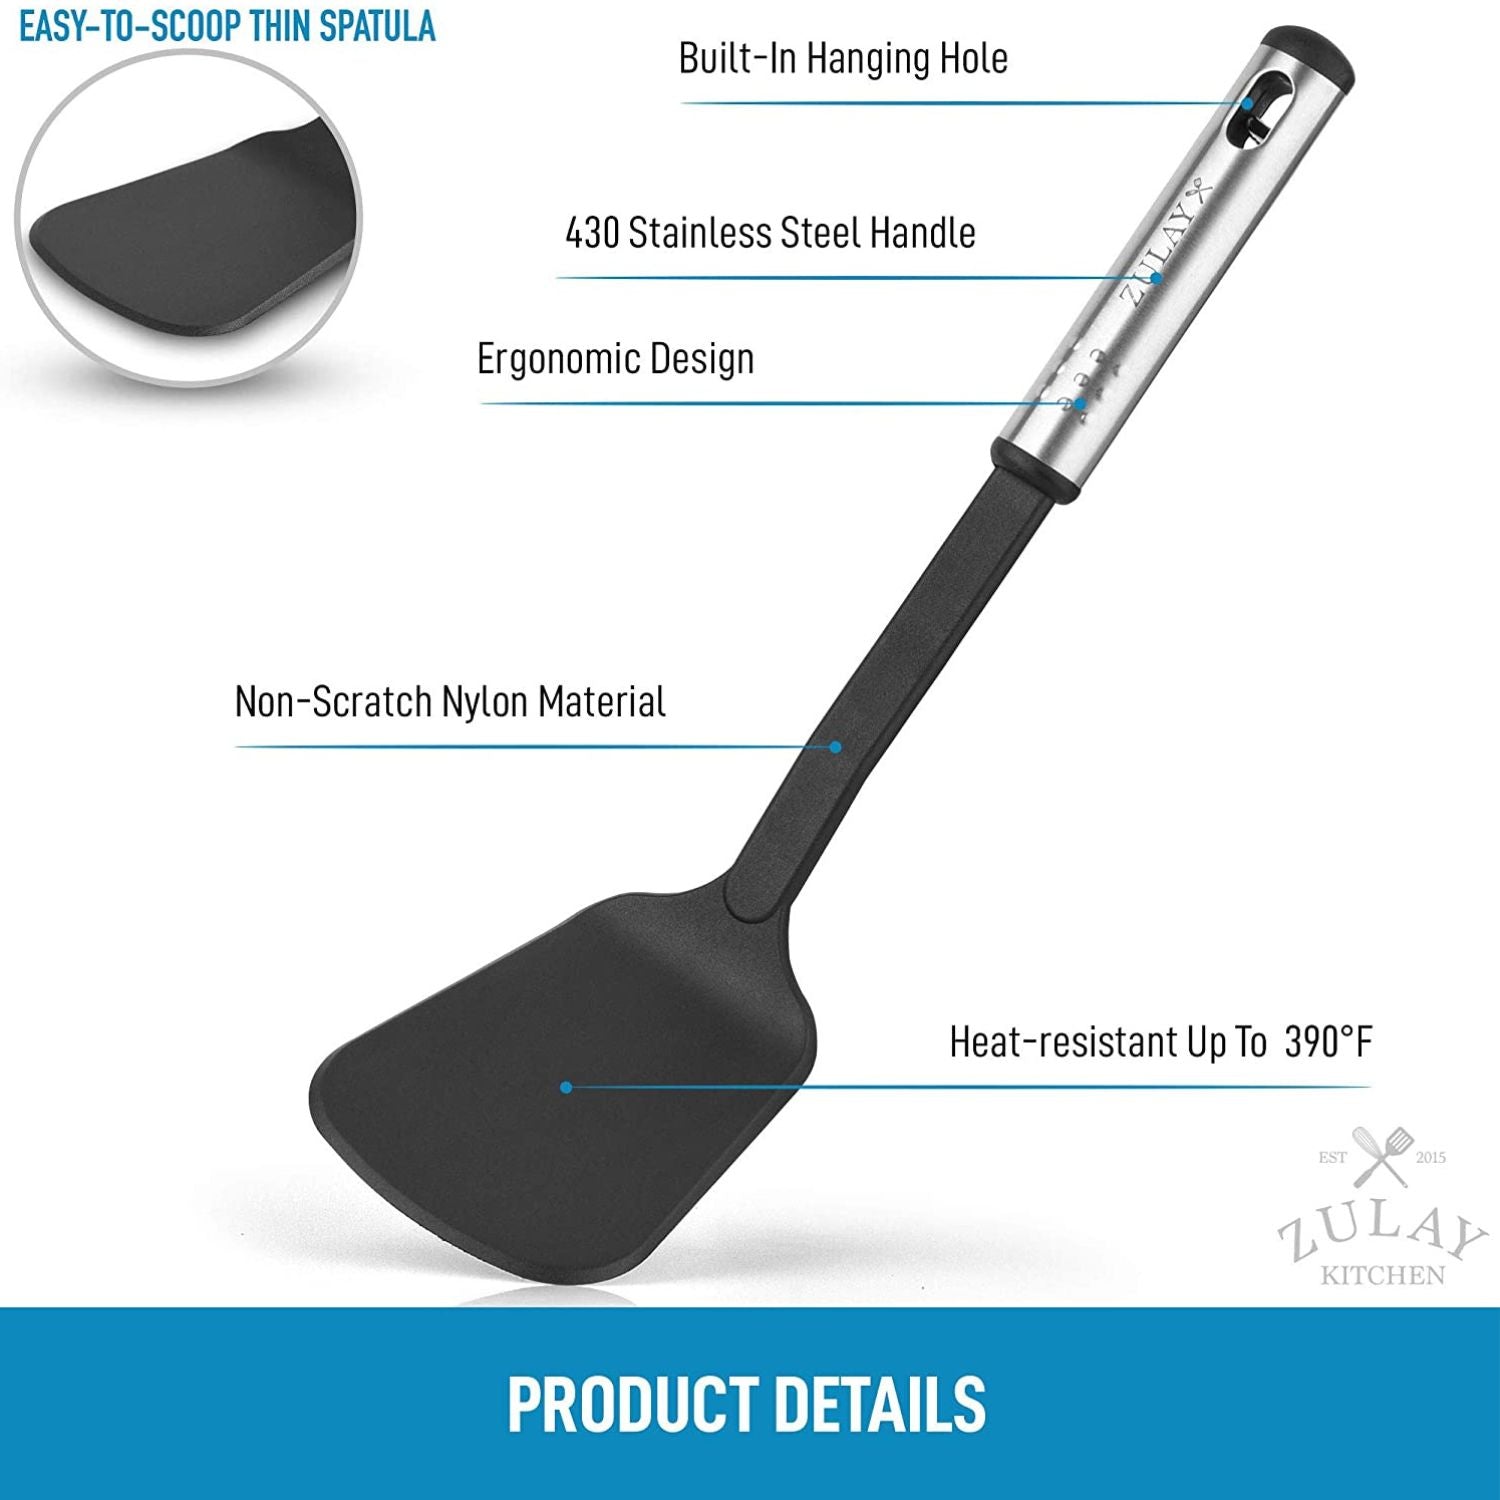 High quality Nylon Spatula with stainless steel handle